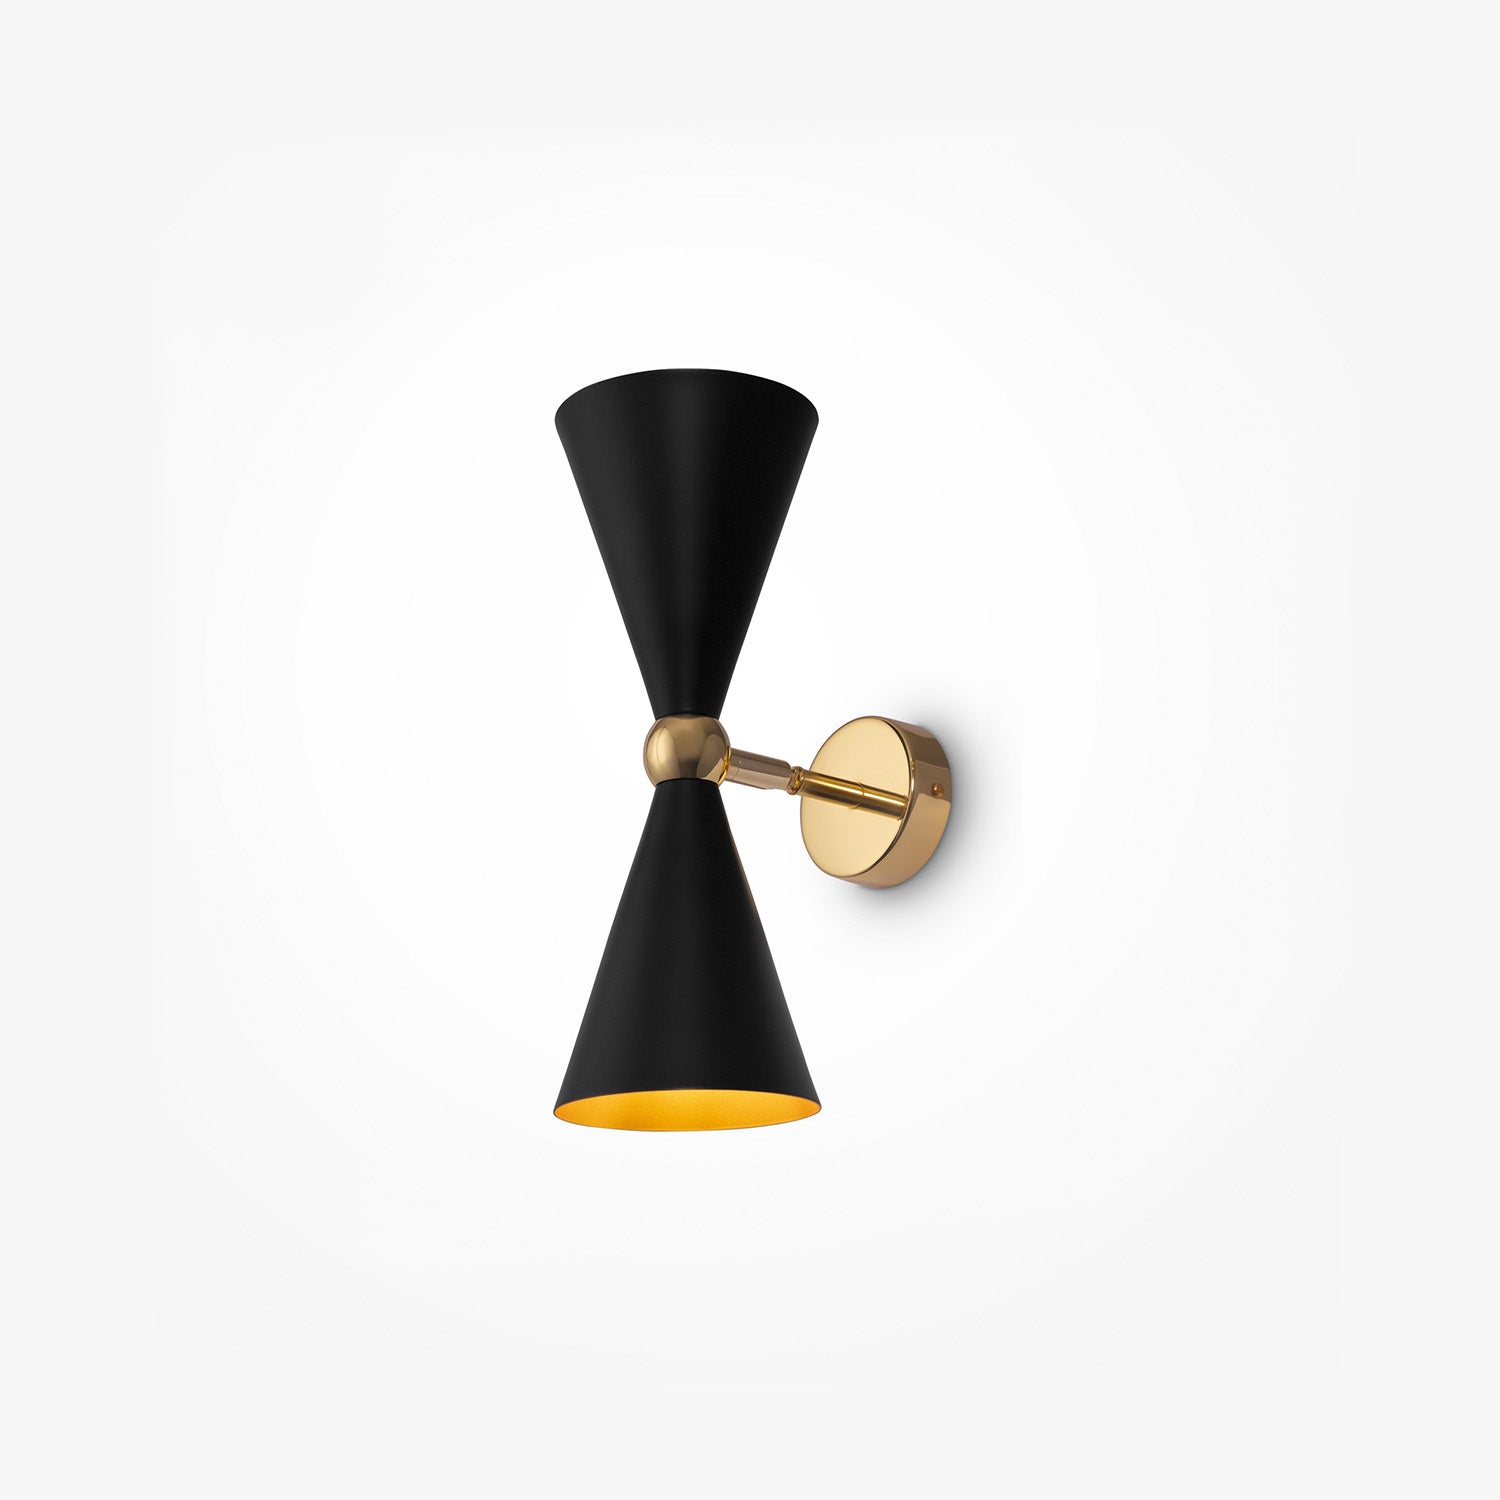 VESPER - Vintage Black or White and Gold Conical Wall Light